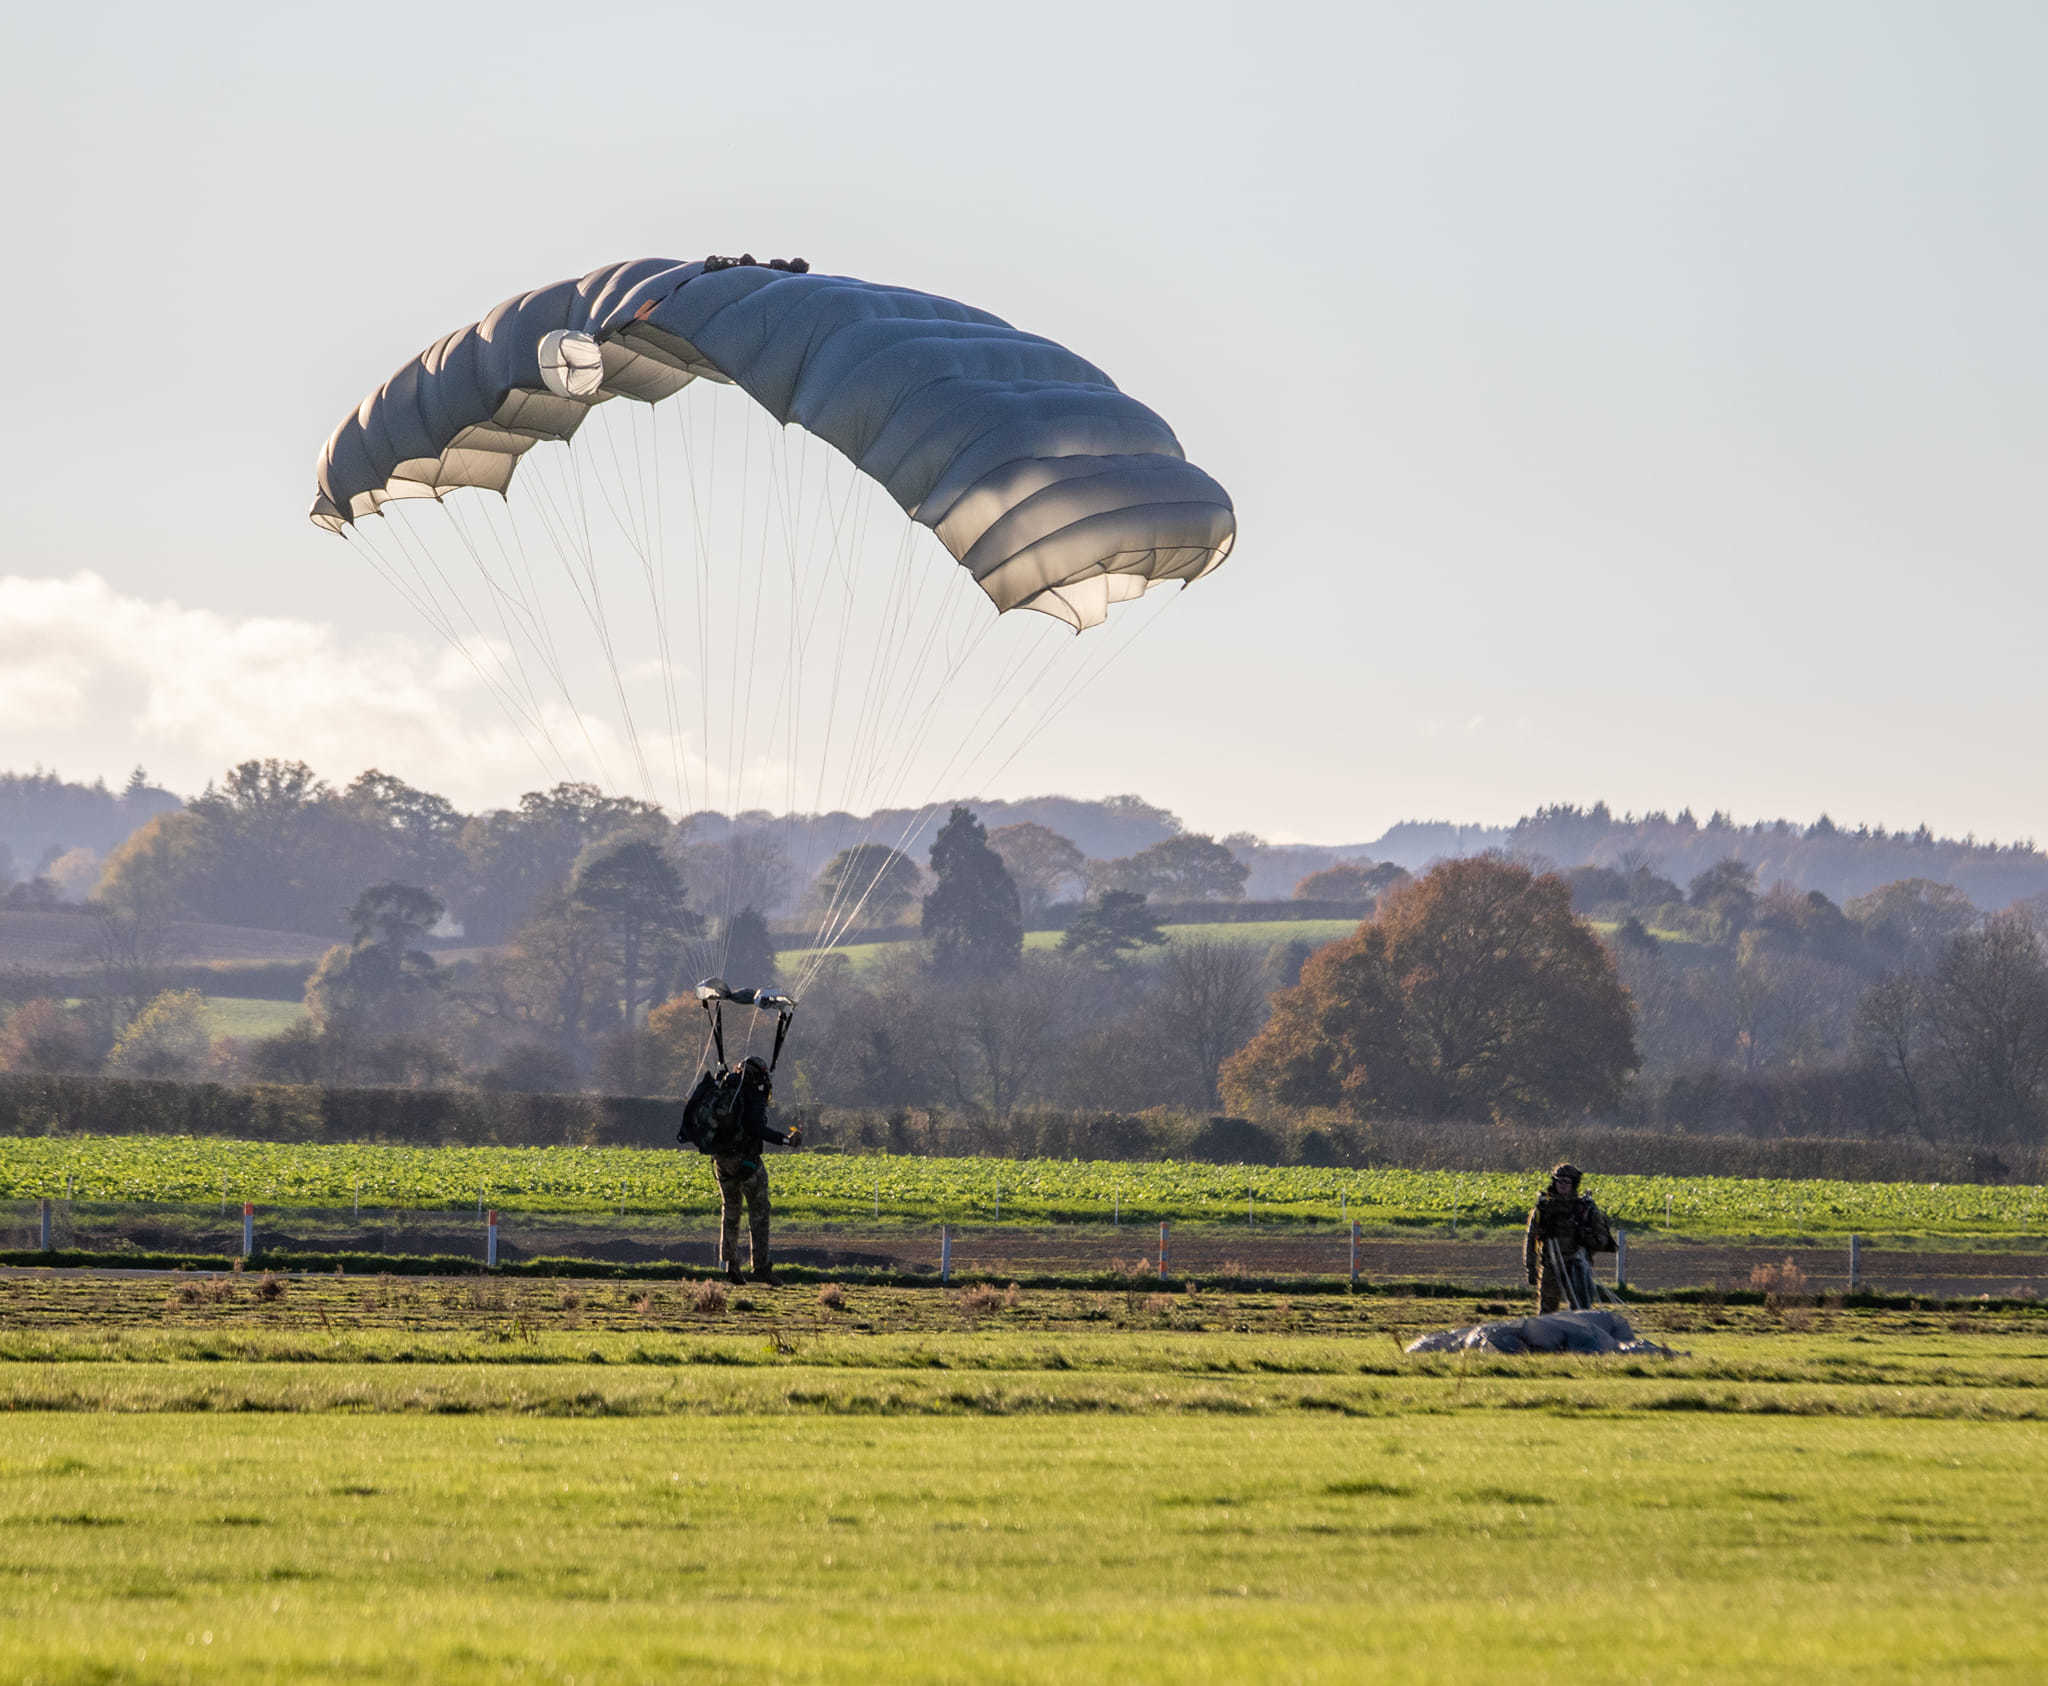 Four parachutists jumped from the plane and landed back at the airfield. Picture: Tom Pennington/Hereford Times Camera Club